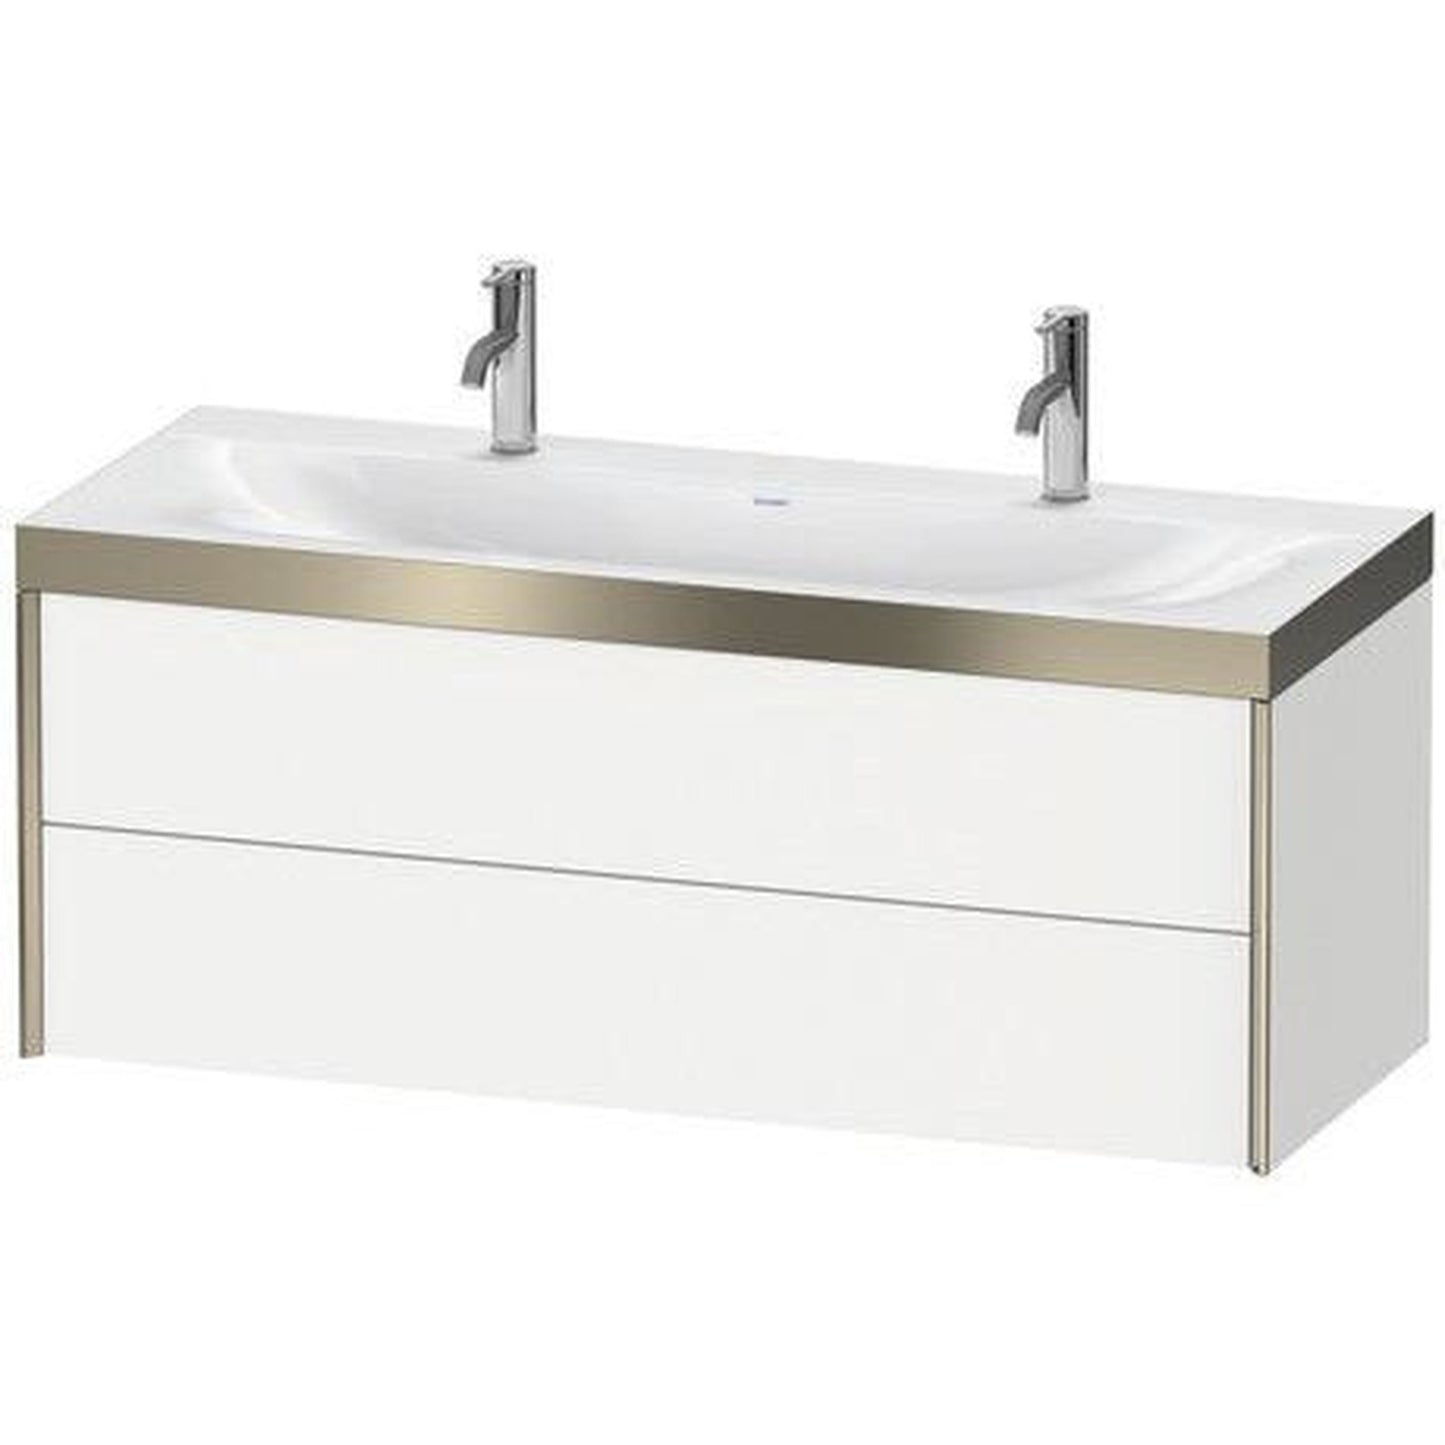 Duravit Xviu 47" x 20" x 19" Two Drawer C-Bonded Wall-Mount Vanity Kit With One Tap Hole, Concrete Gray (XV4618OB107P)